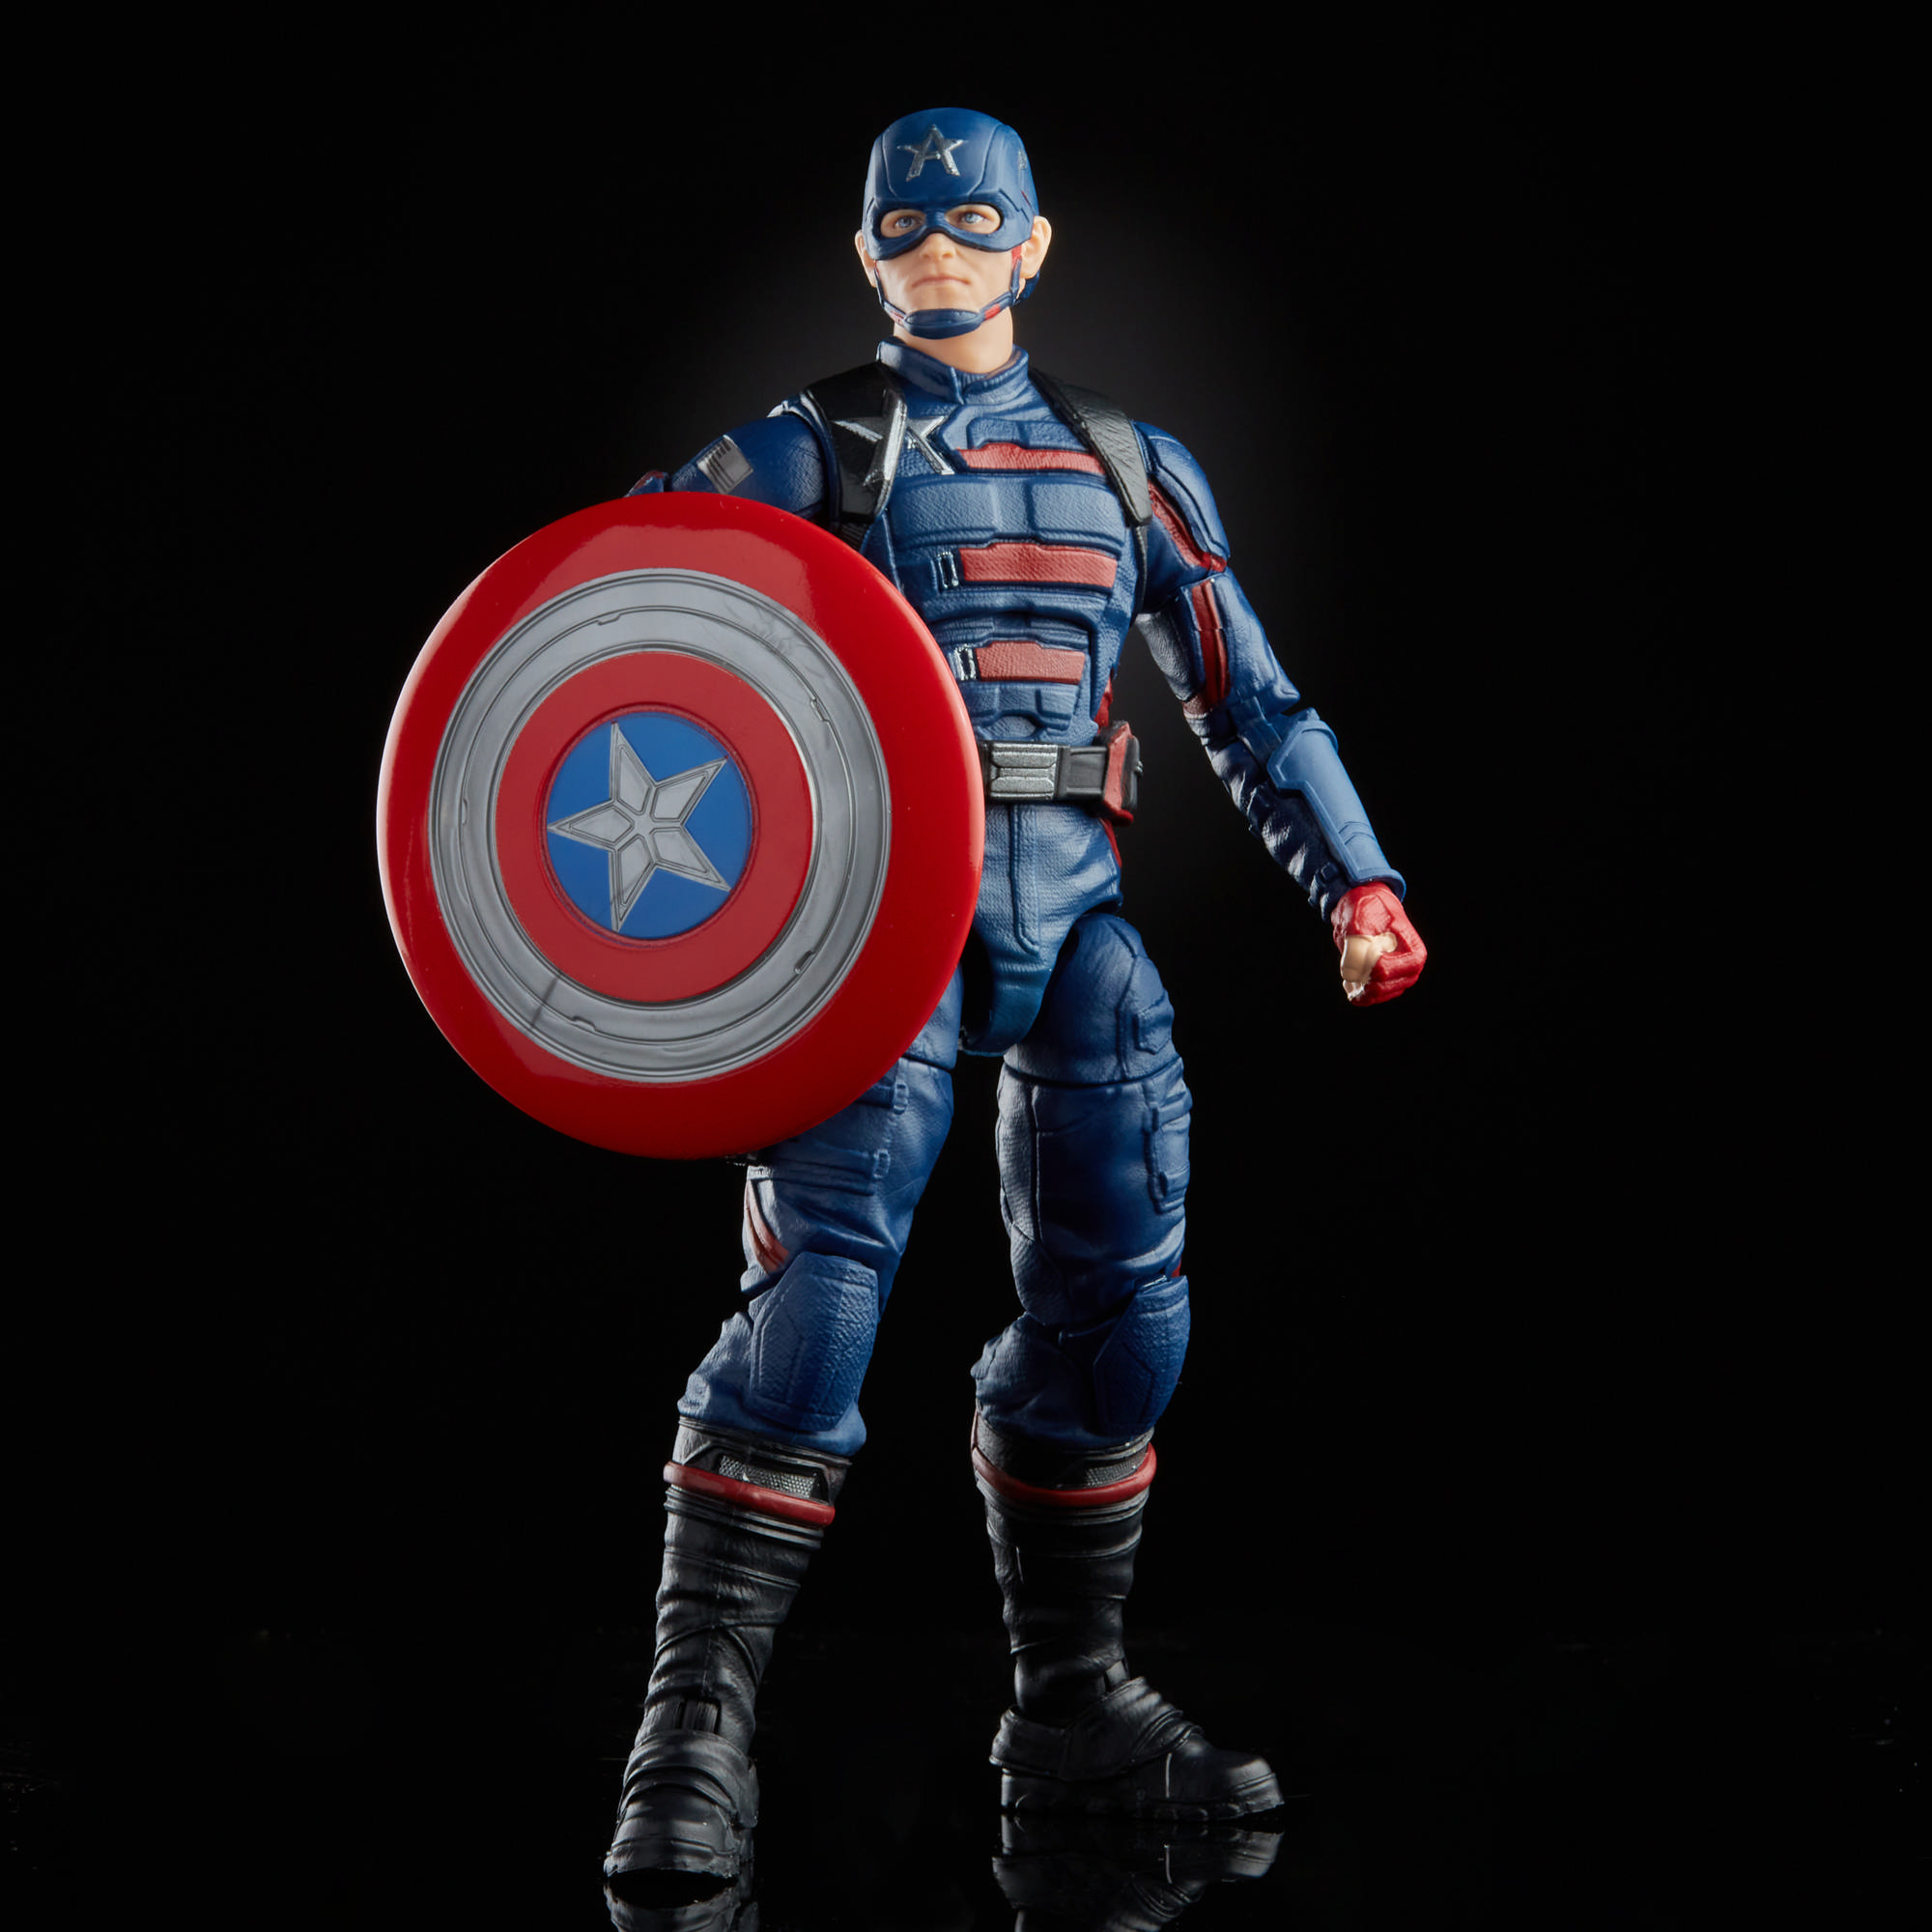 Marvel Legends: Hasbro reveals John Walker Captain America figure from 'The Falcon and the Winter Soldier'